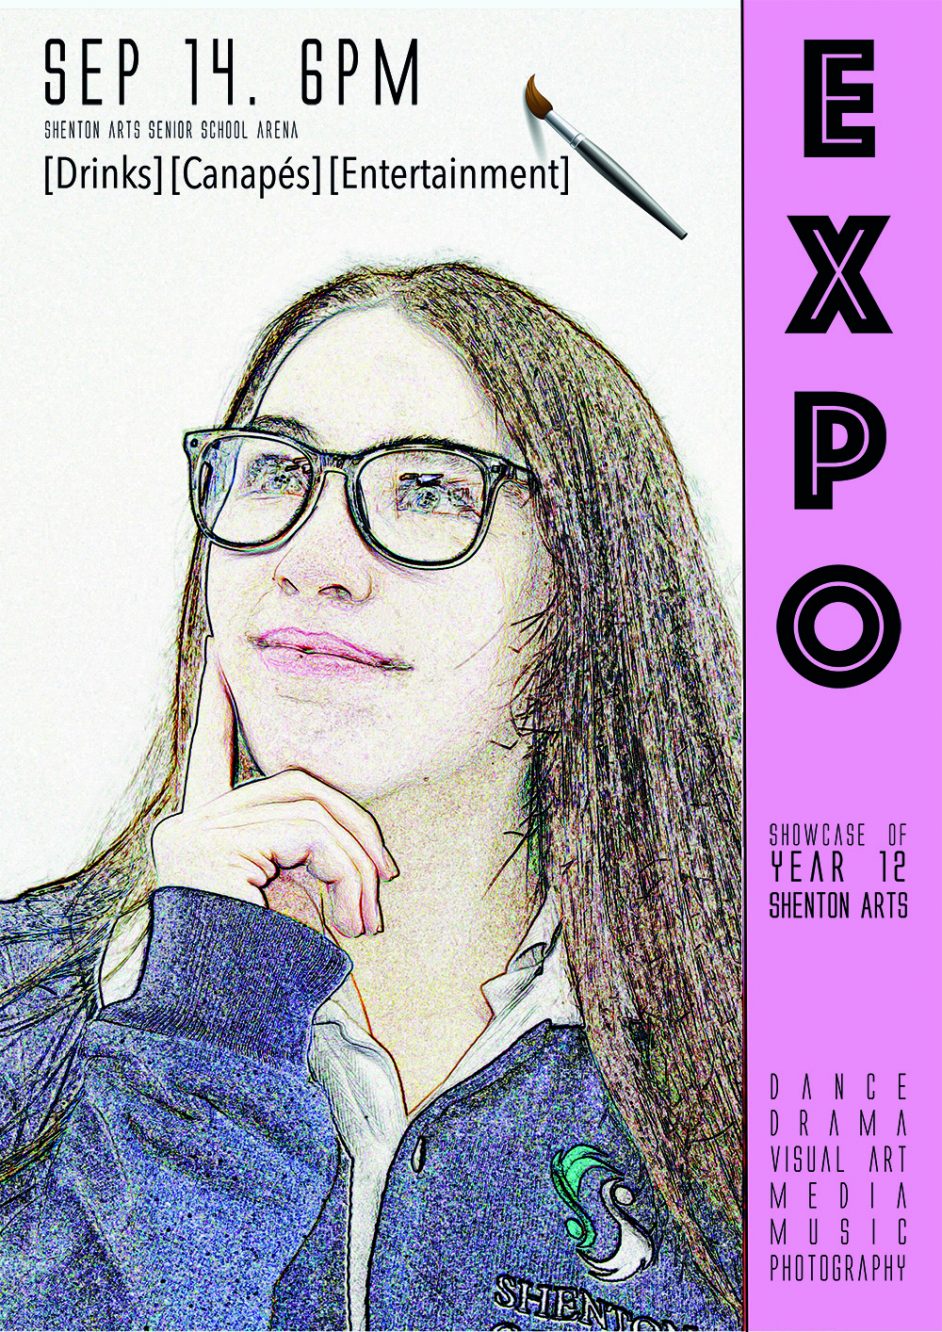 Expo Poster